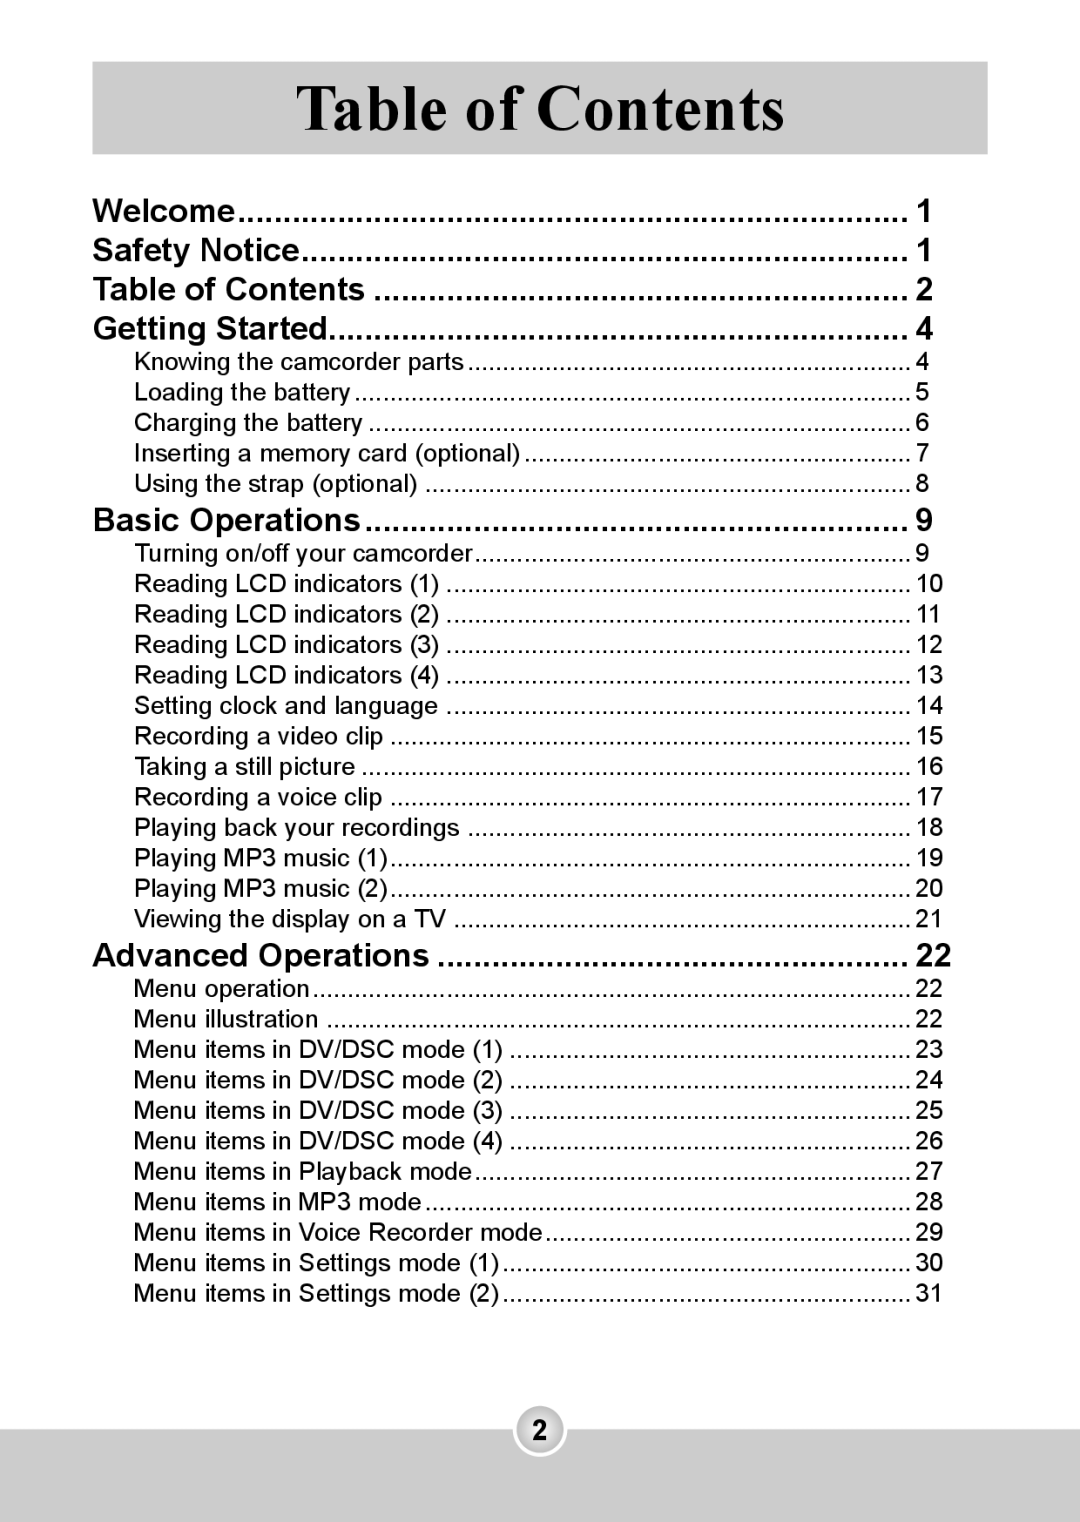 Nokia 6108 manual Table of Contents, Welcome, Safety Notice, Getting Started, Basic Operations, Advanced Operations 